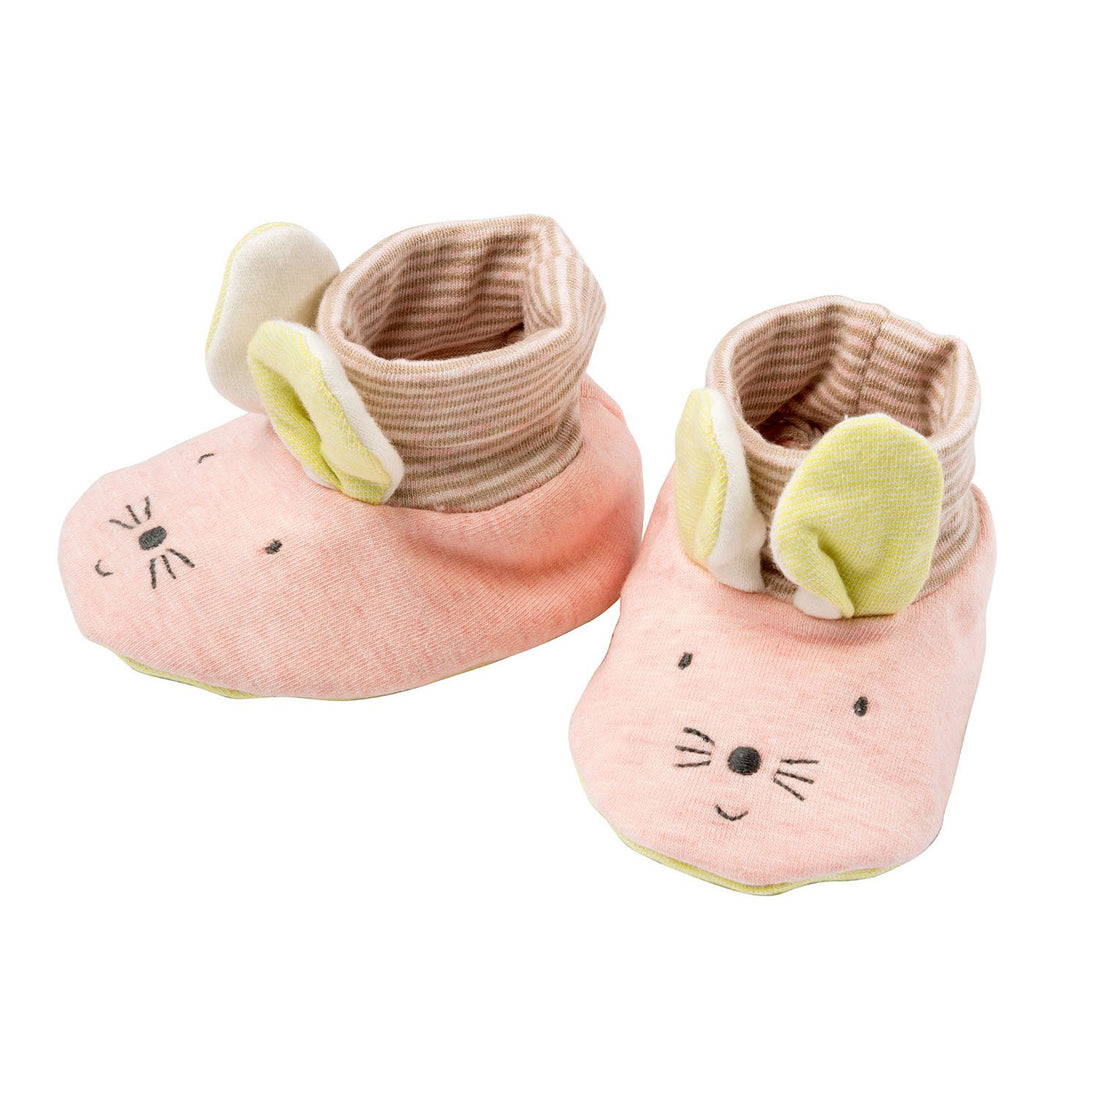 moulin-roty-pink-baby-slippers-lpd-01